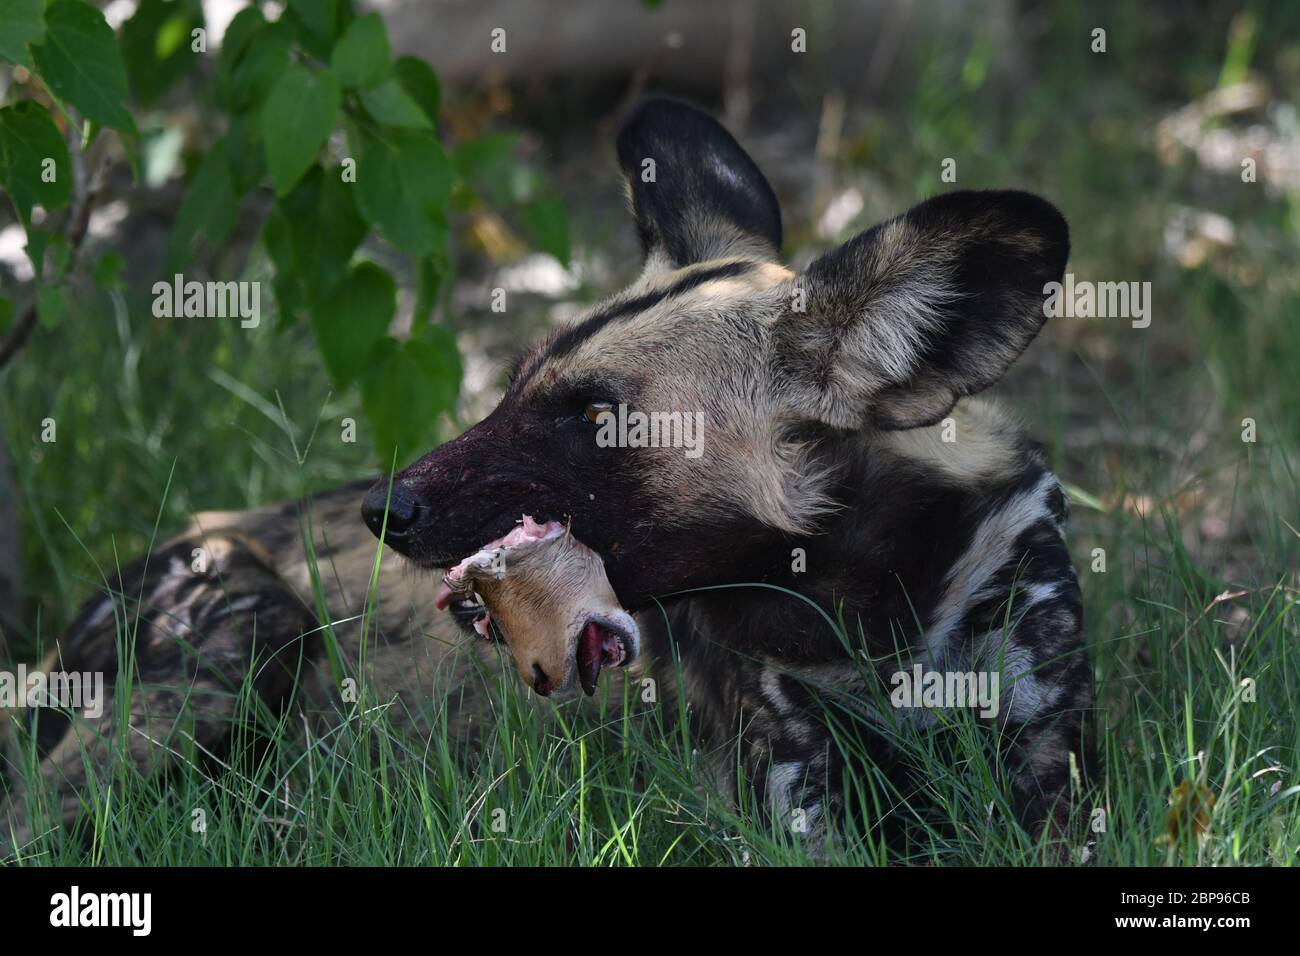 The stunning sequence was captured in the Okavango Delta in Botswana. BOTSWANA: A ?SAVAGE? photo captures the GRISLY moment an African wild dog chows Stock Photo